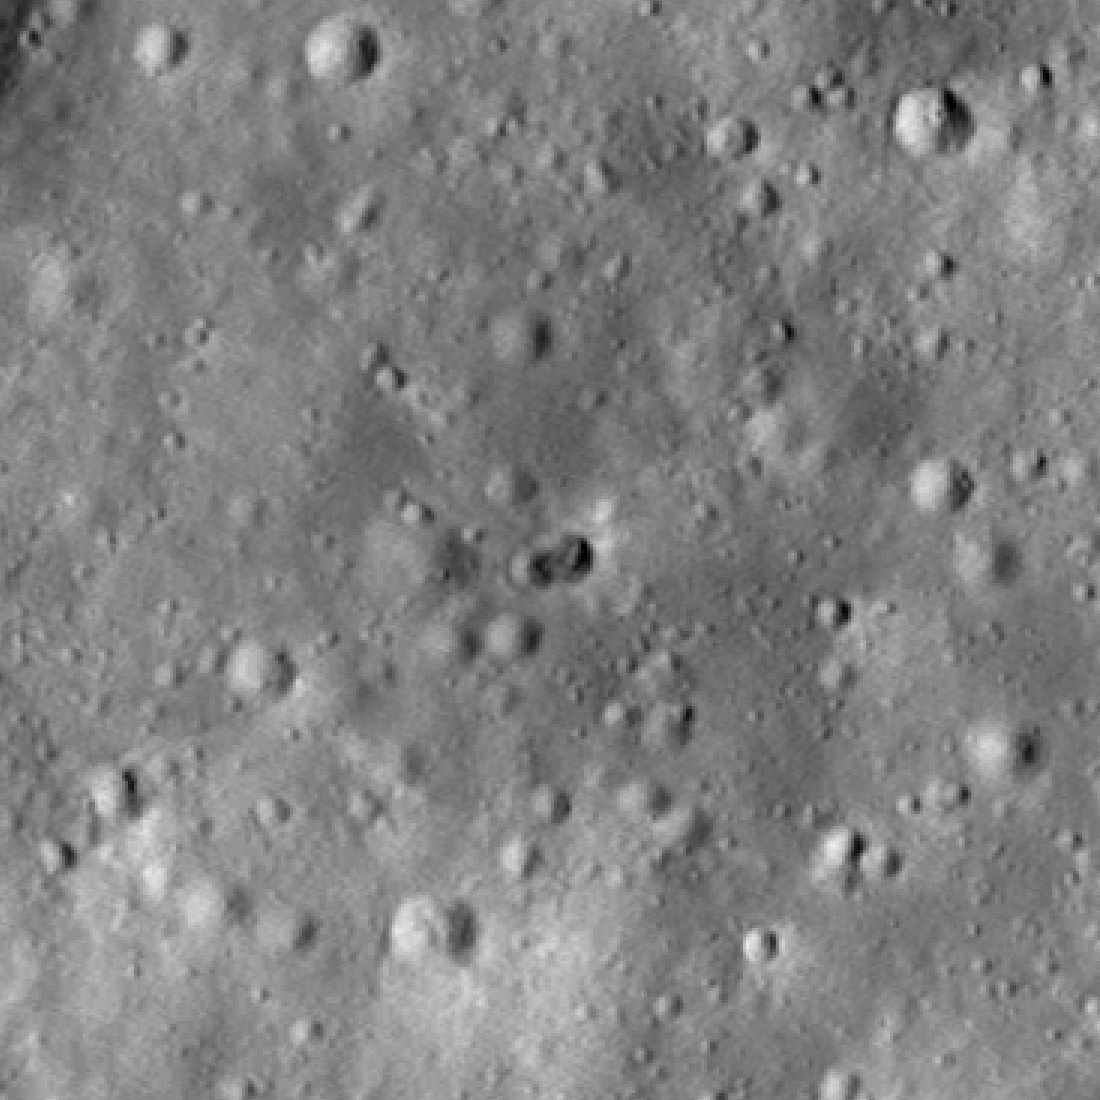 The site of the March 4, 2022 rocket crash on the moon is shown in this before-and-after pair of photos taken by NASA’s Lunar Reconnaissance Orbiter on Feb. 28, 2022 and May 21, 2022, respectively.